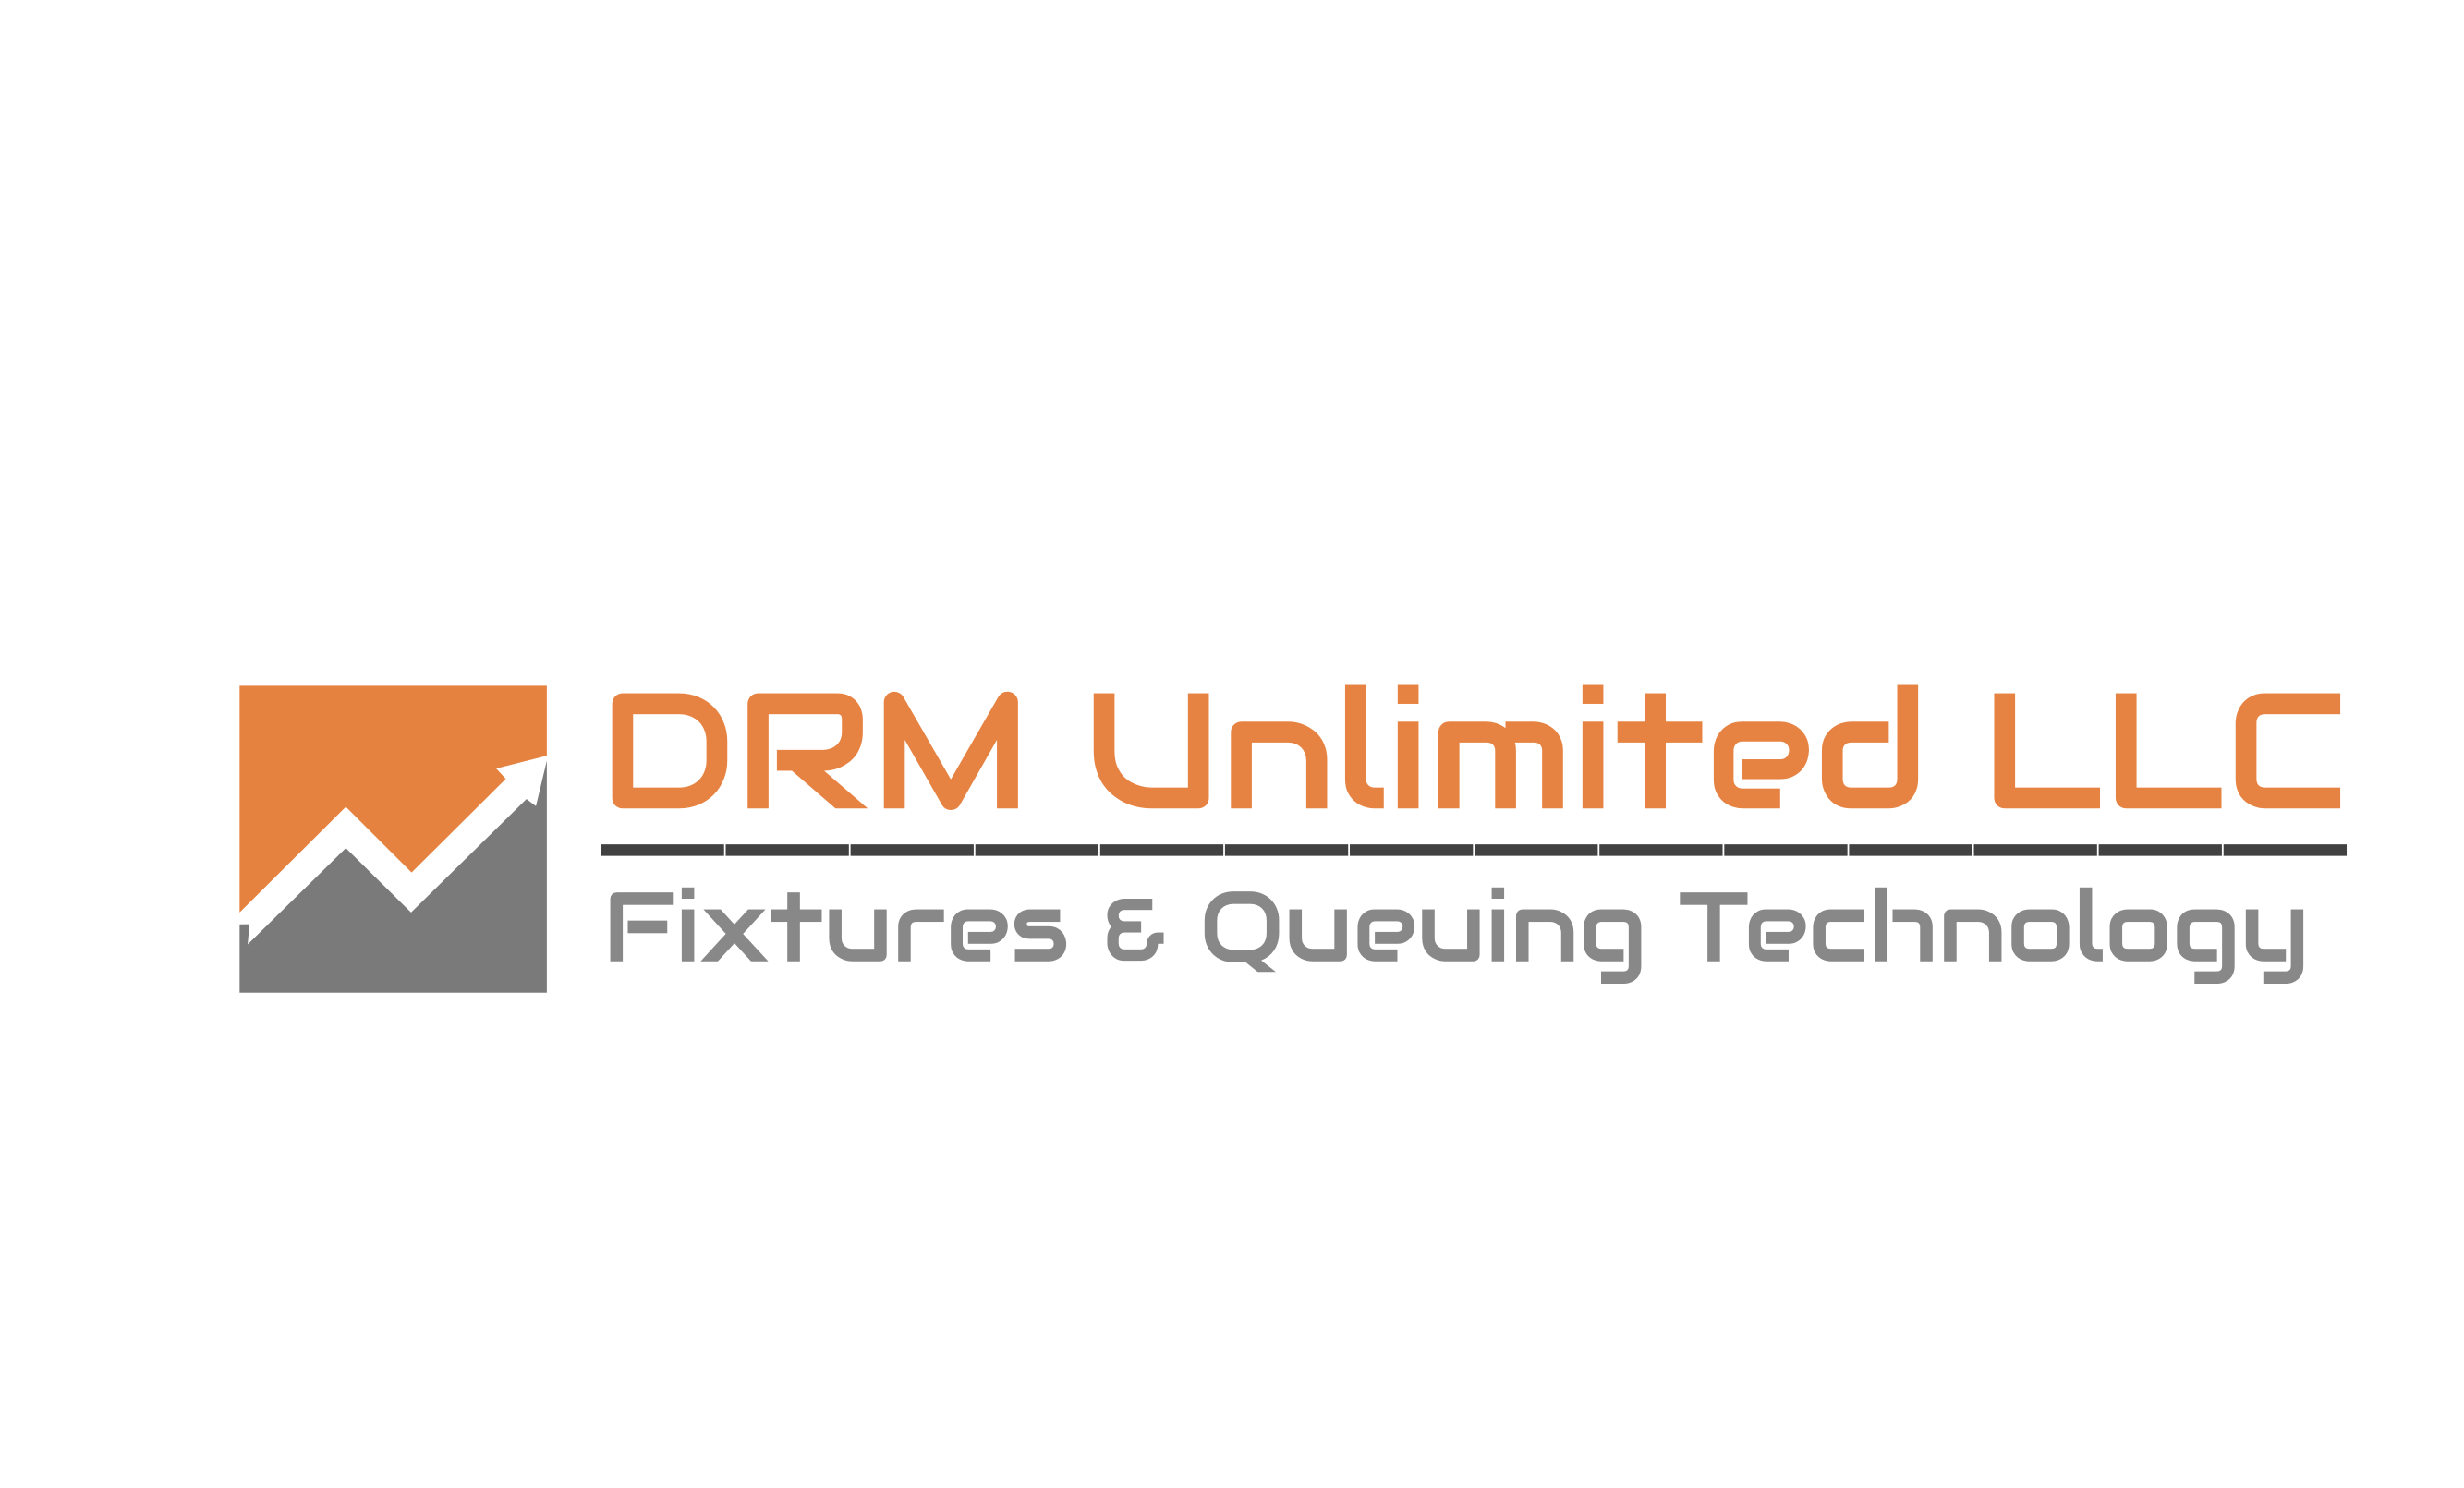 DRM Unlimited LLC is now Certified by the Women’s Business Enterprise National Council